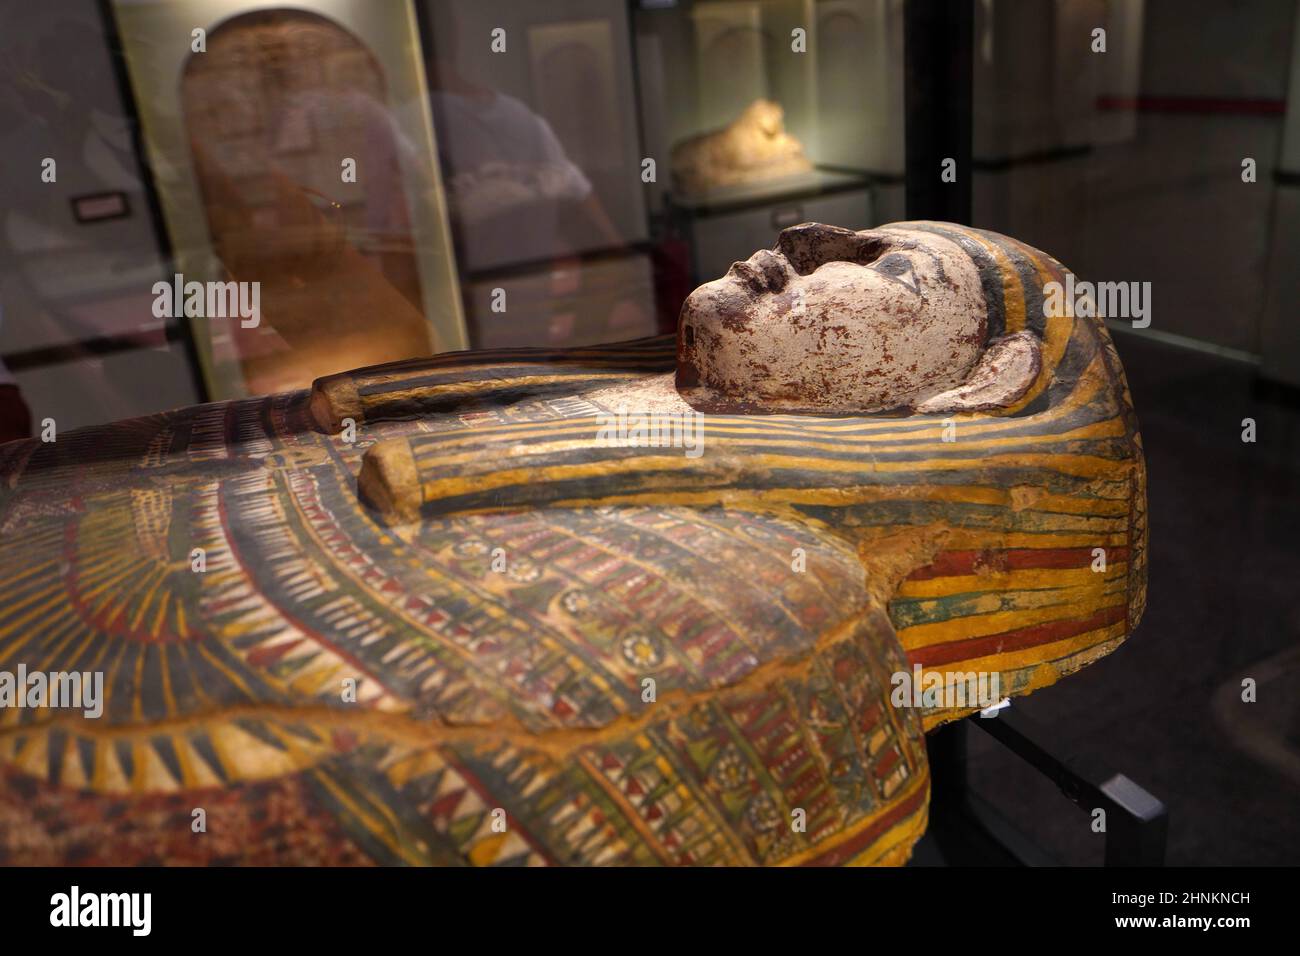 TURIN, ITALY - AUGUST 19, 2021: pharaoh sarcophagus wooden coffin and mummification during the Egyptian civilization, Egyptian Museum of Turin, Italy Stock Photo